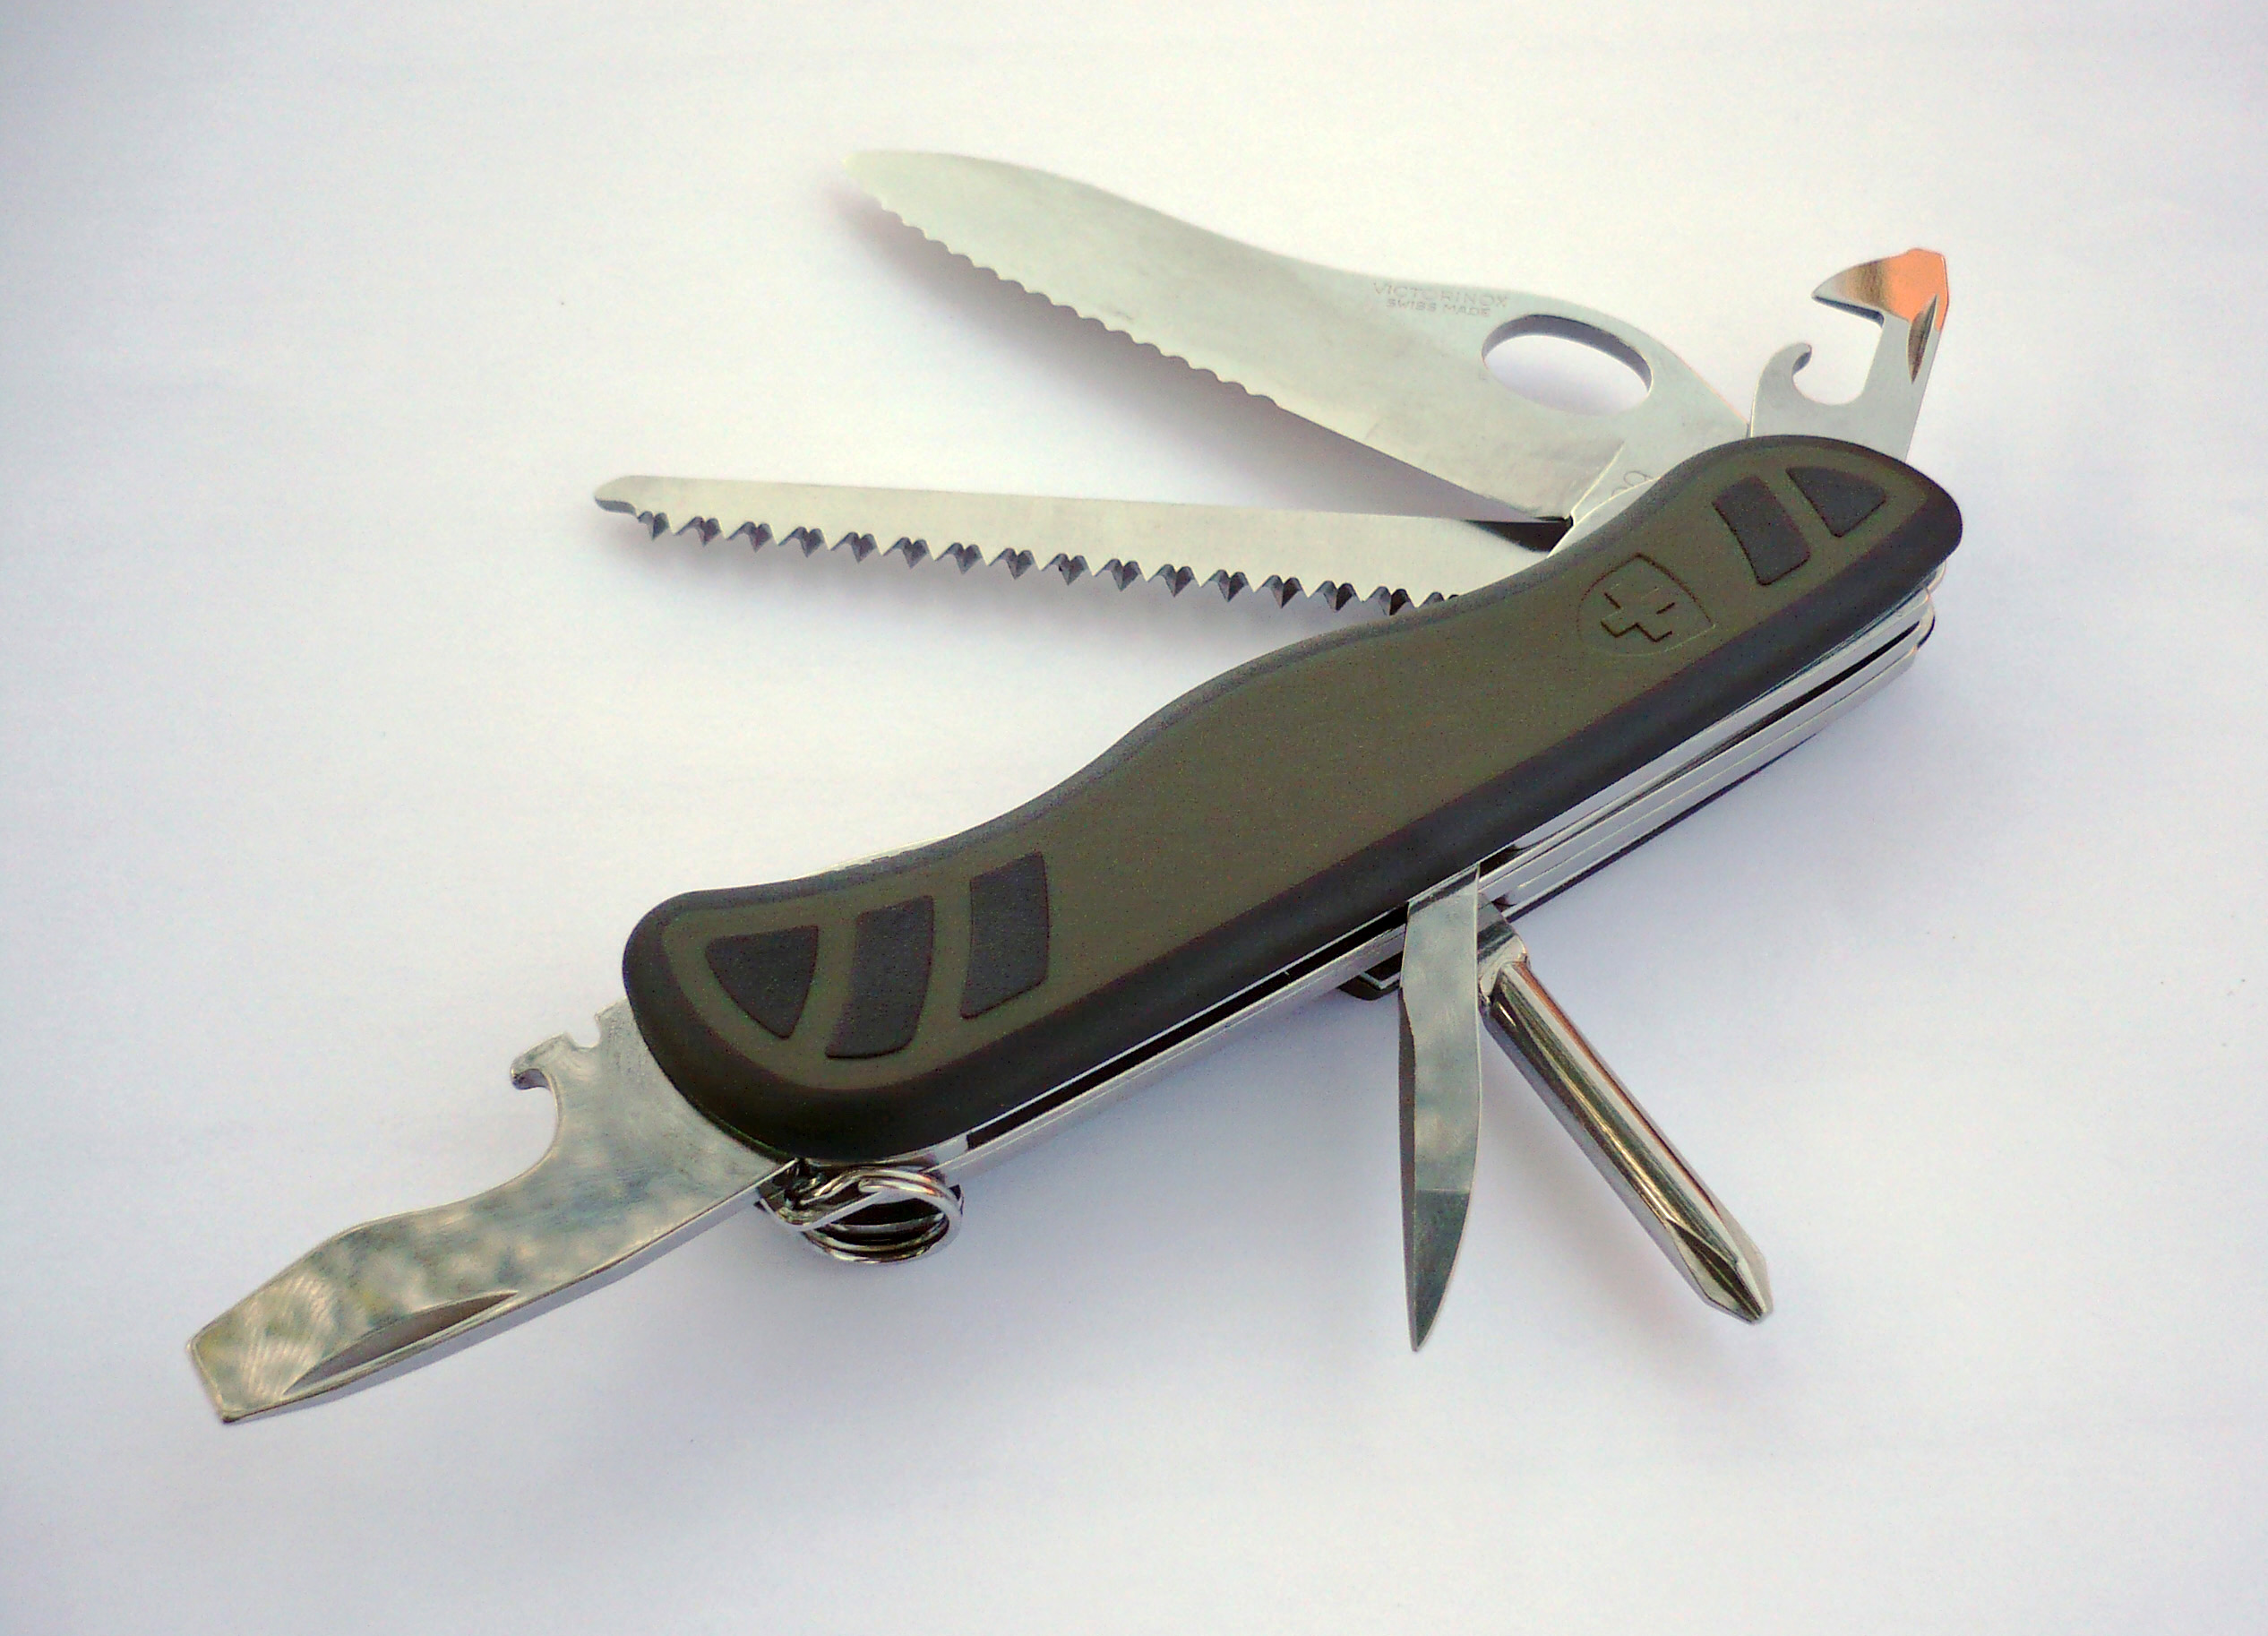 Knife used by Swiss Armed Forces